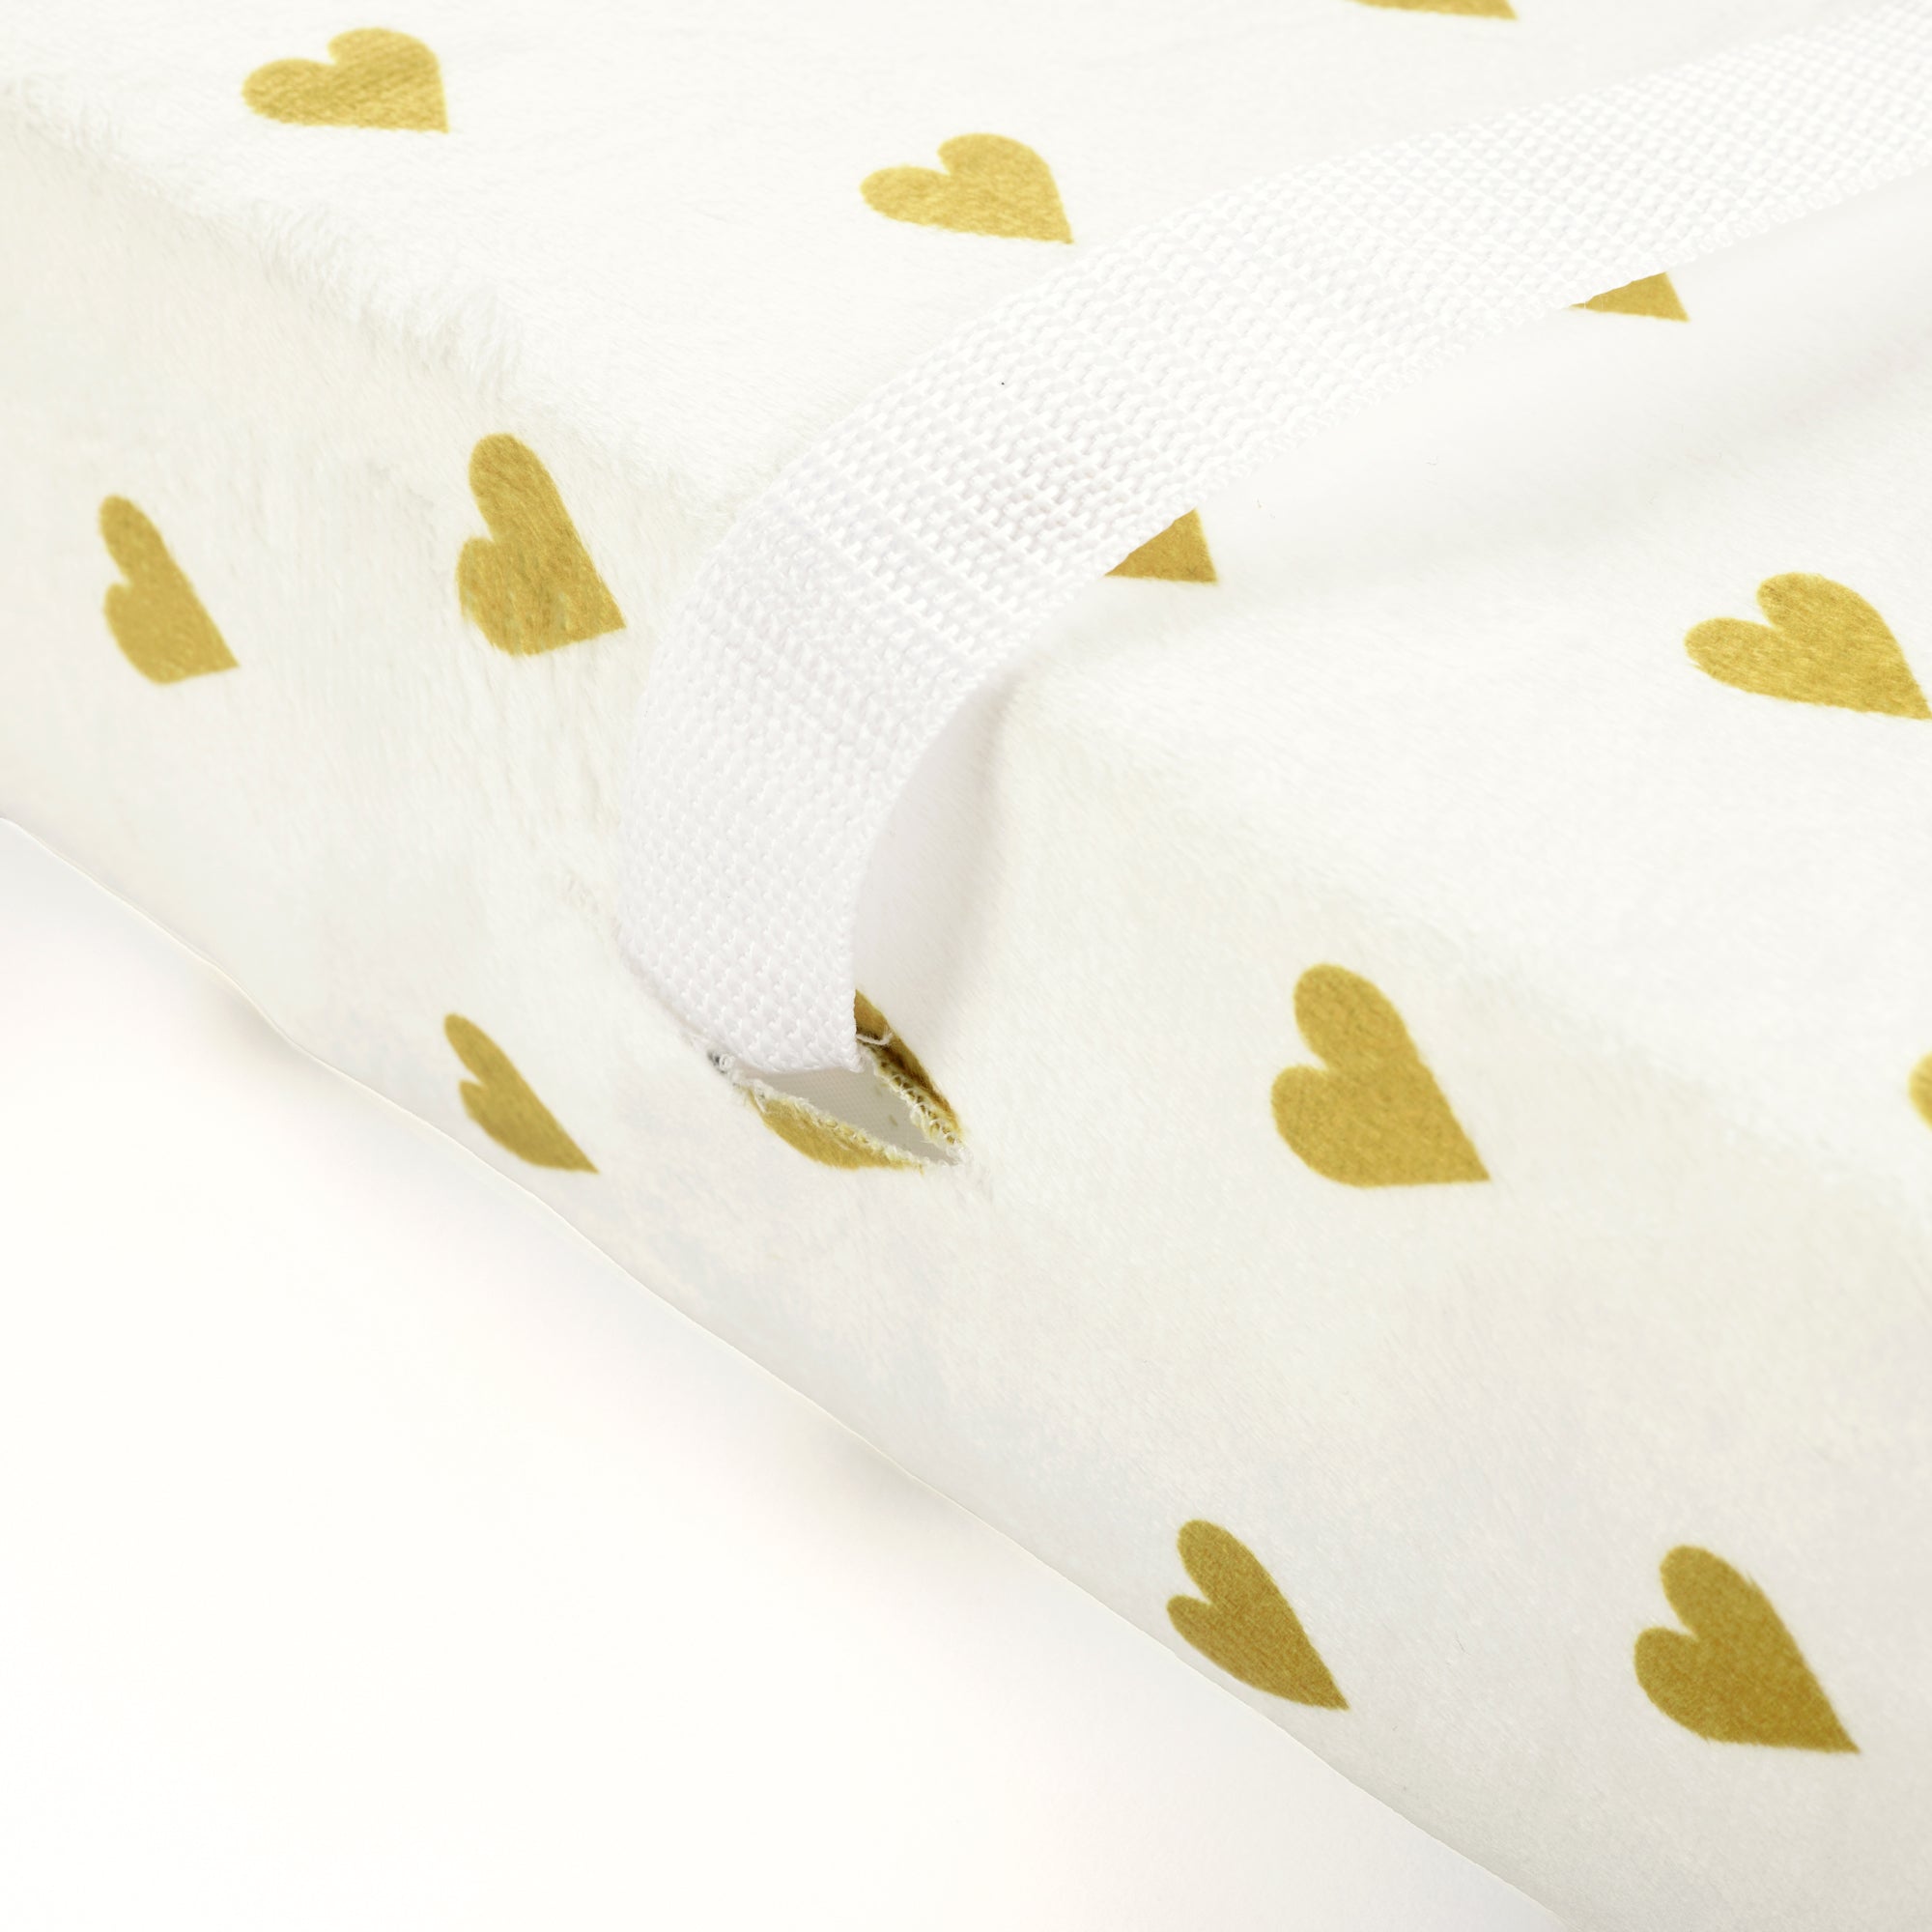 Boho Metallic Hearts All Over Soft & Plush Changing Pad Cover